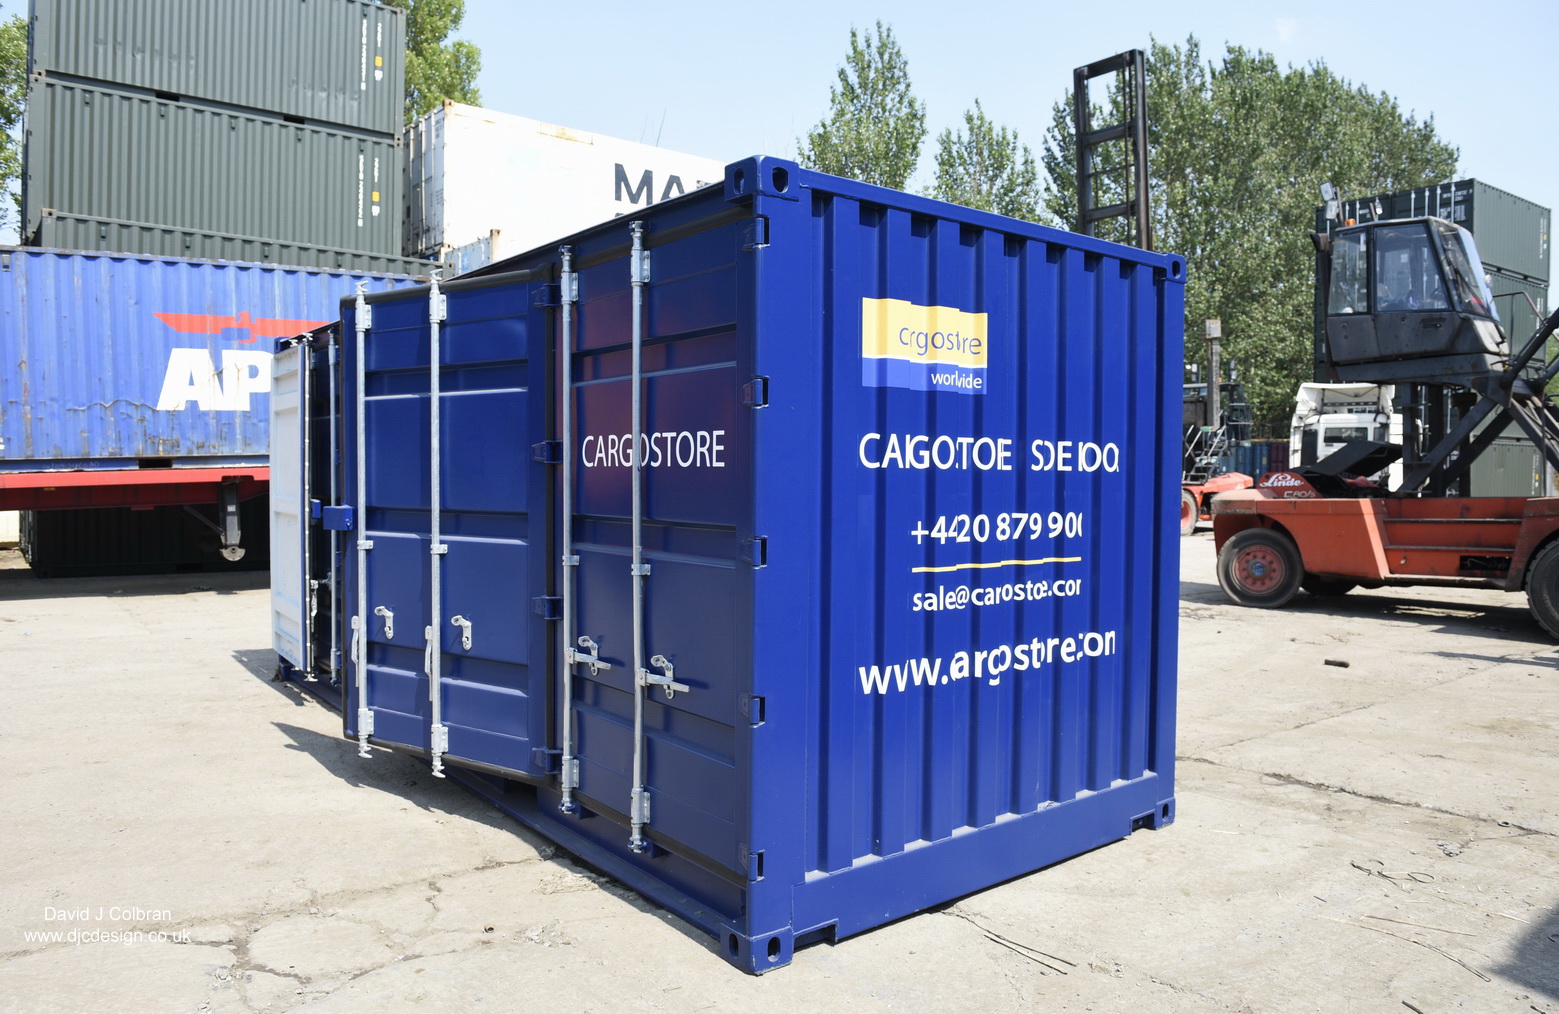 Bespoke Shipping container photography Merseyside